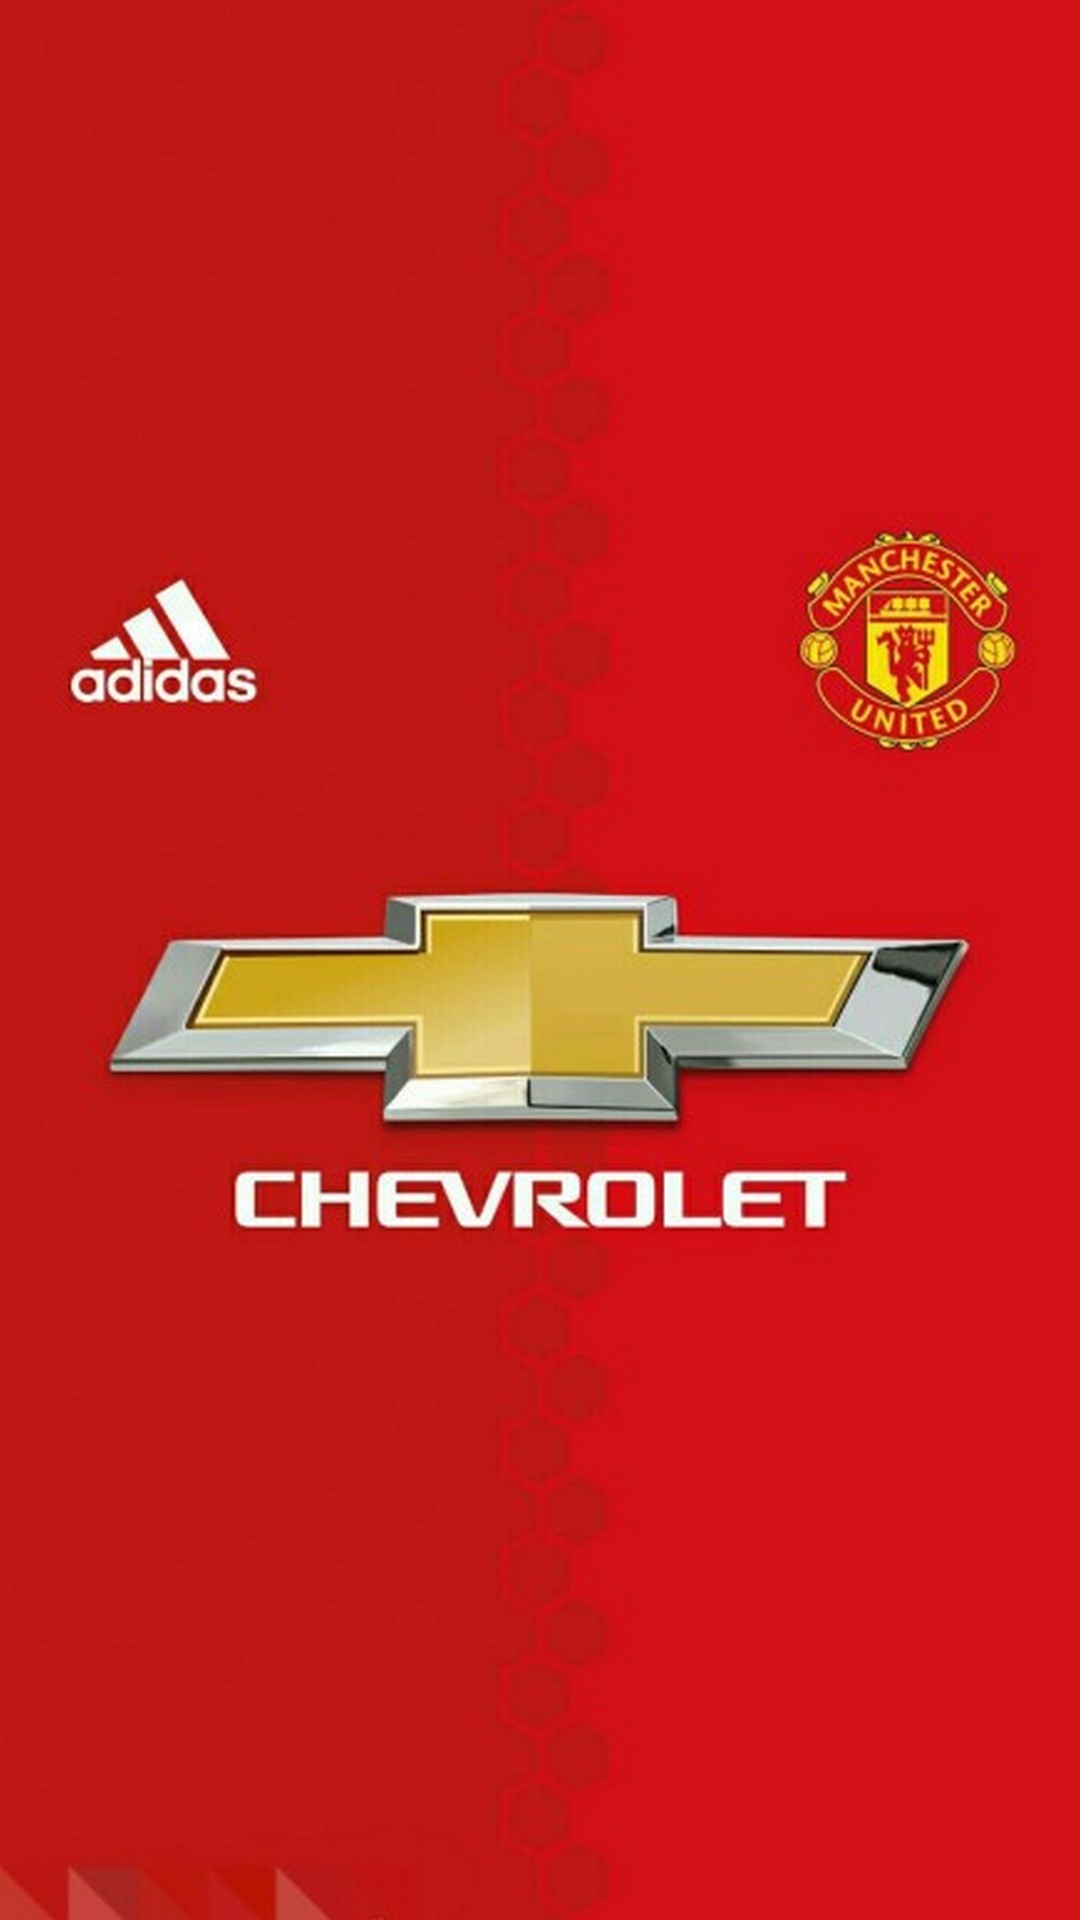 Mobile Wallpaper Manchester United with high-resolution 1080x1920 pixel. You can use this wallpaper for your Desktop Computers, Mac Screensavers, Windows Backgrounds, iPhone Wallpapers, Tablet or Android Lock screen and another Mobile device